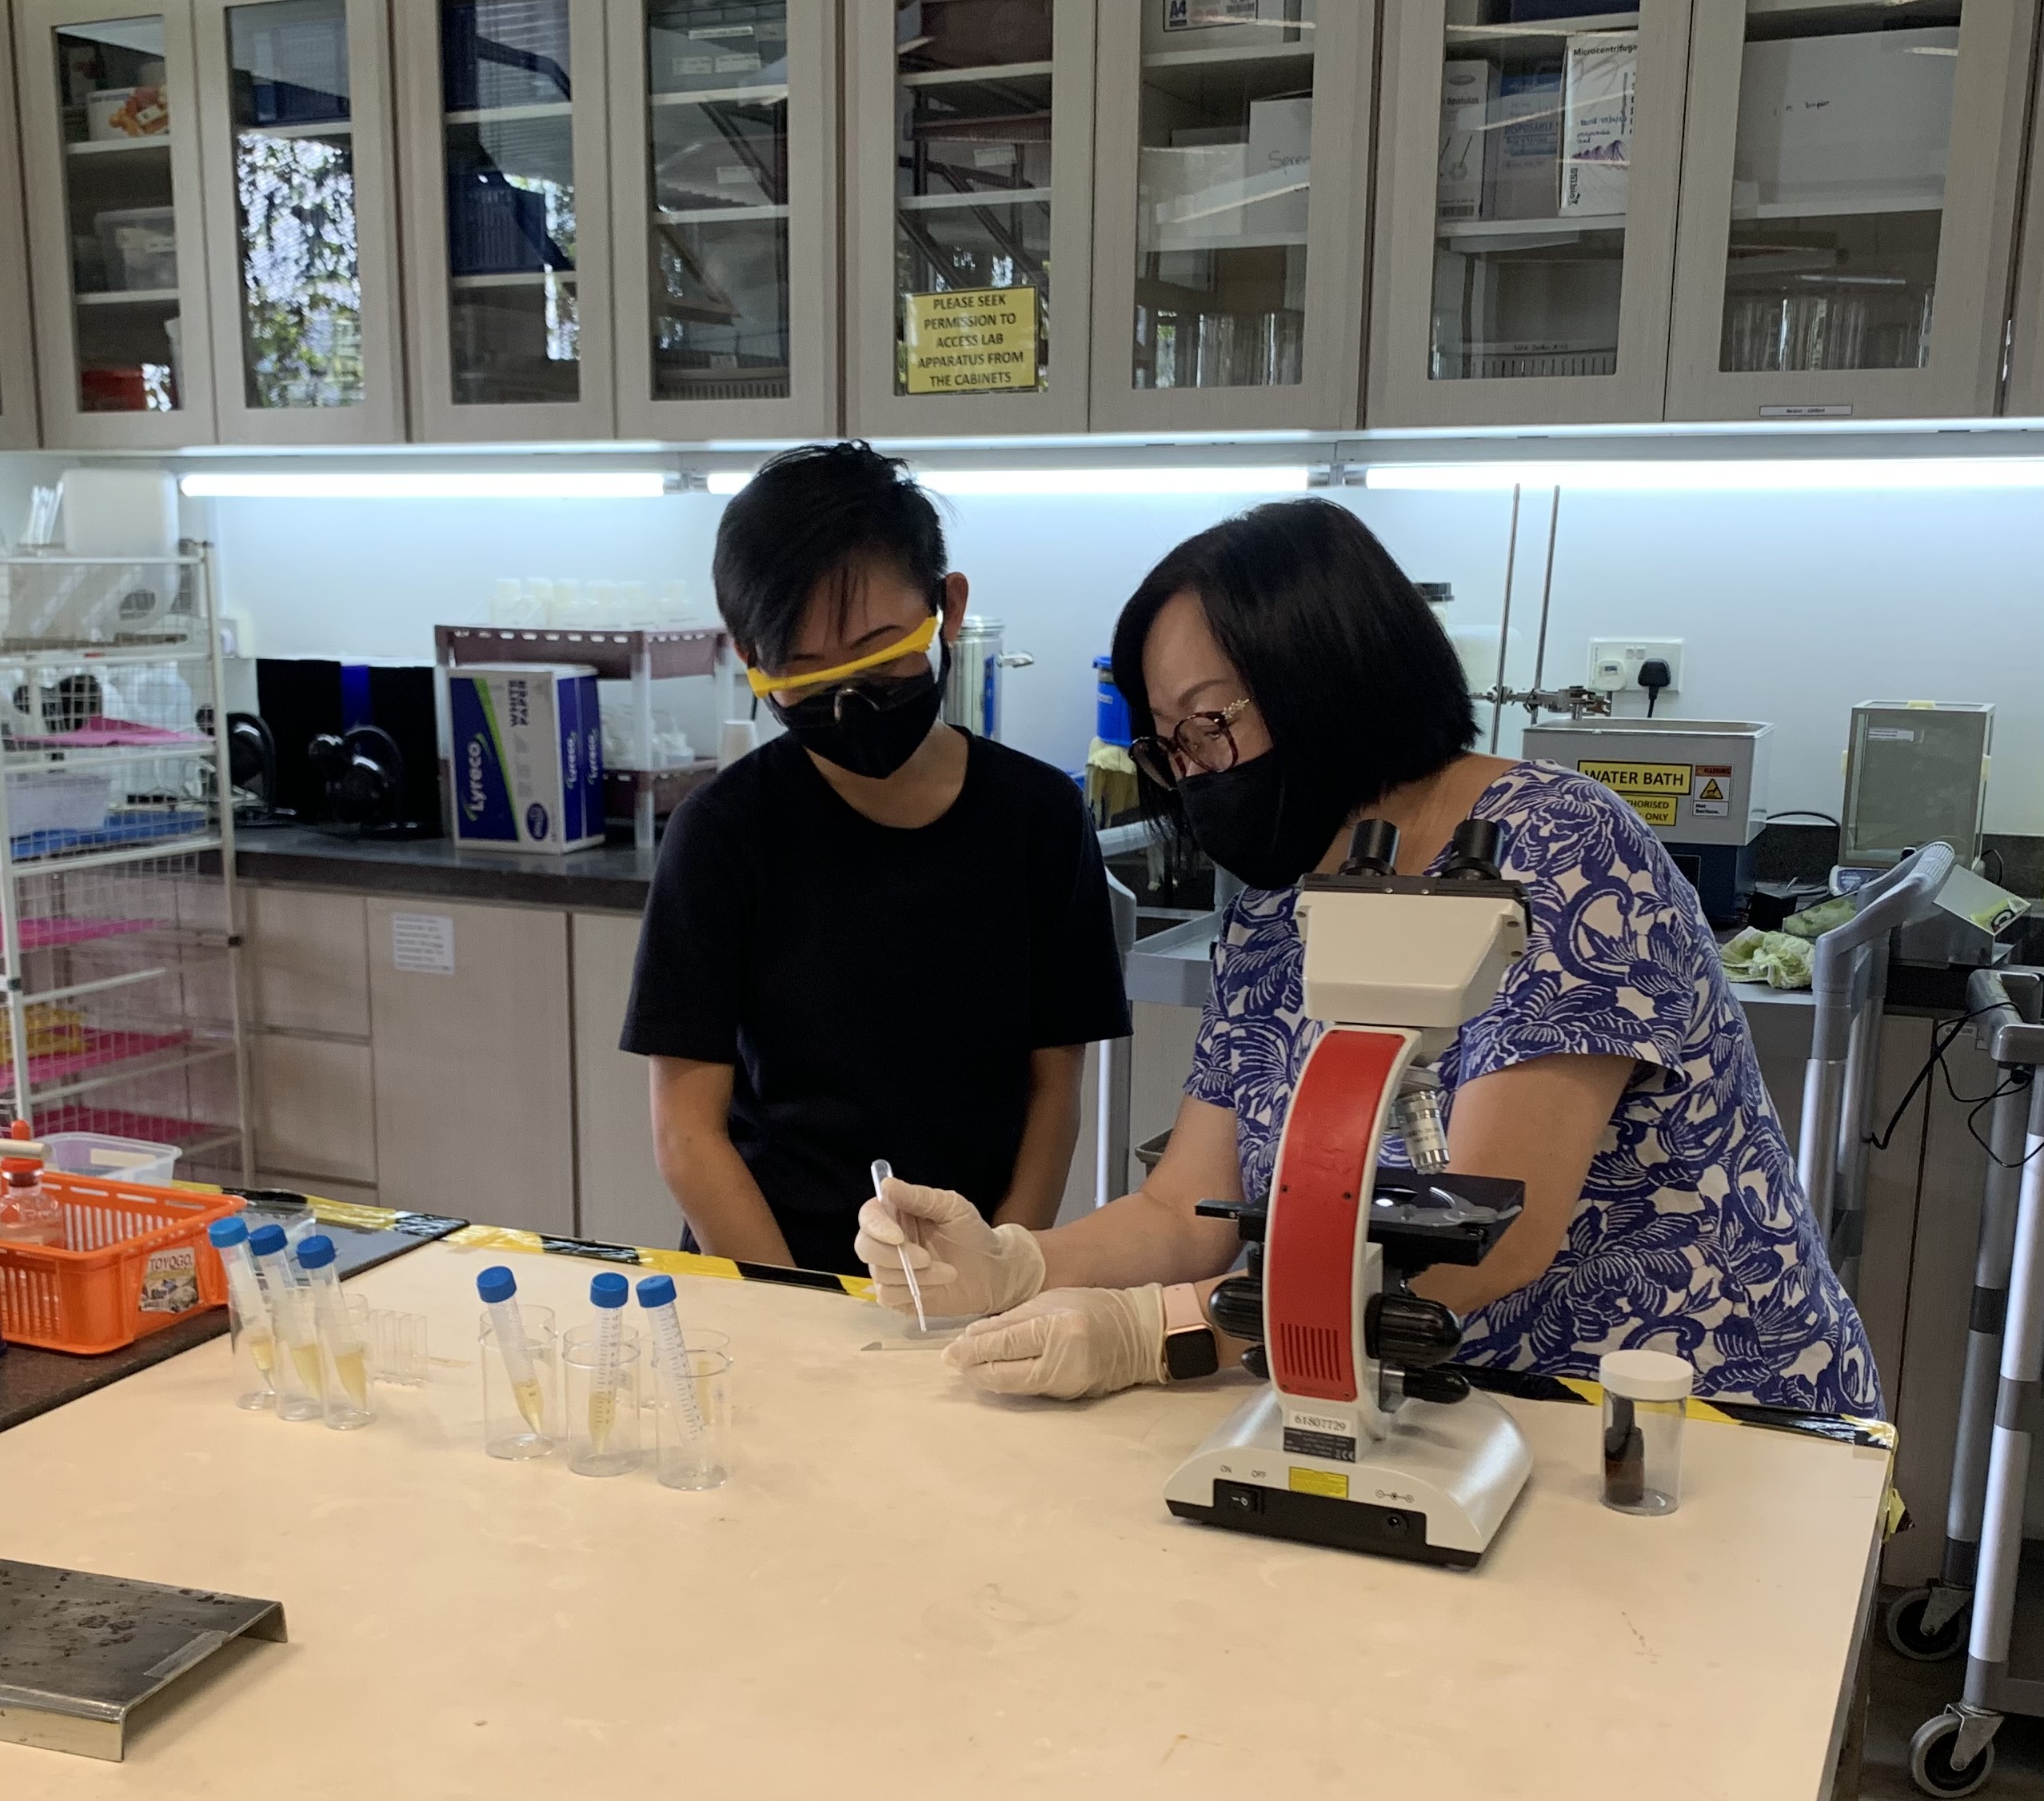 Ms Lai provides support for students working on science projects